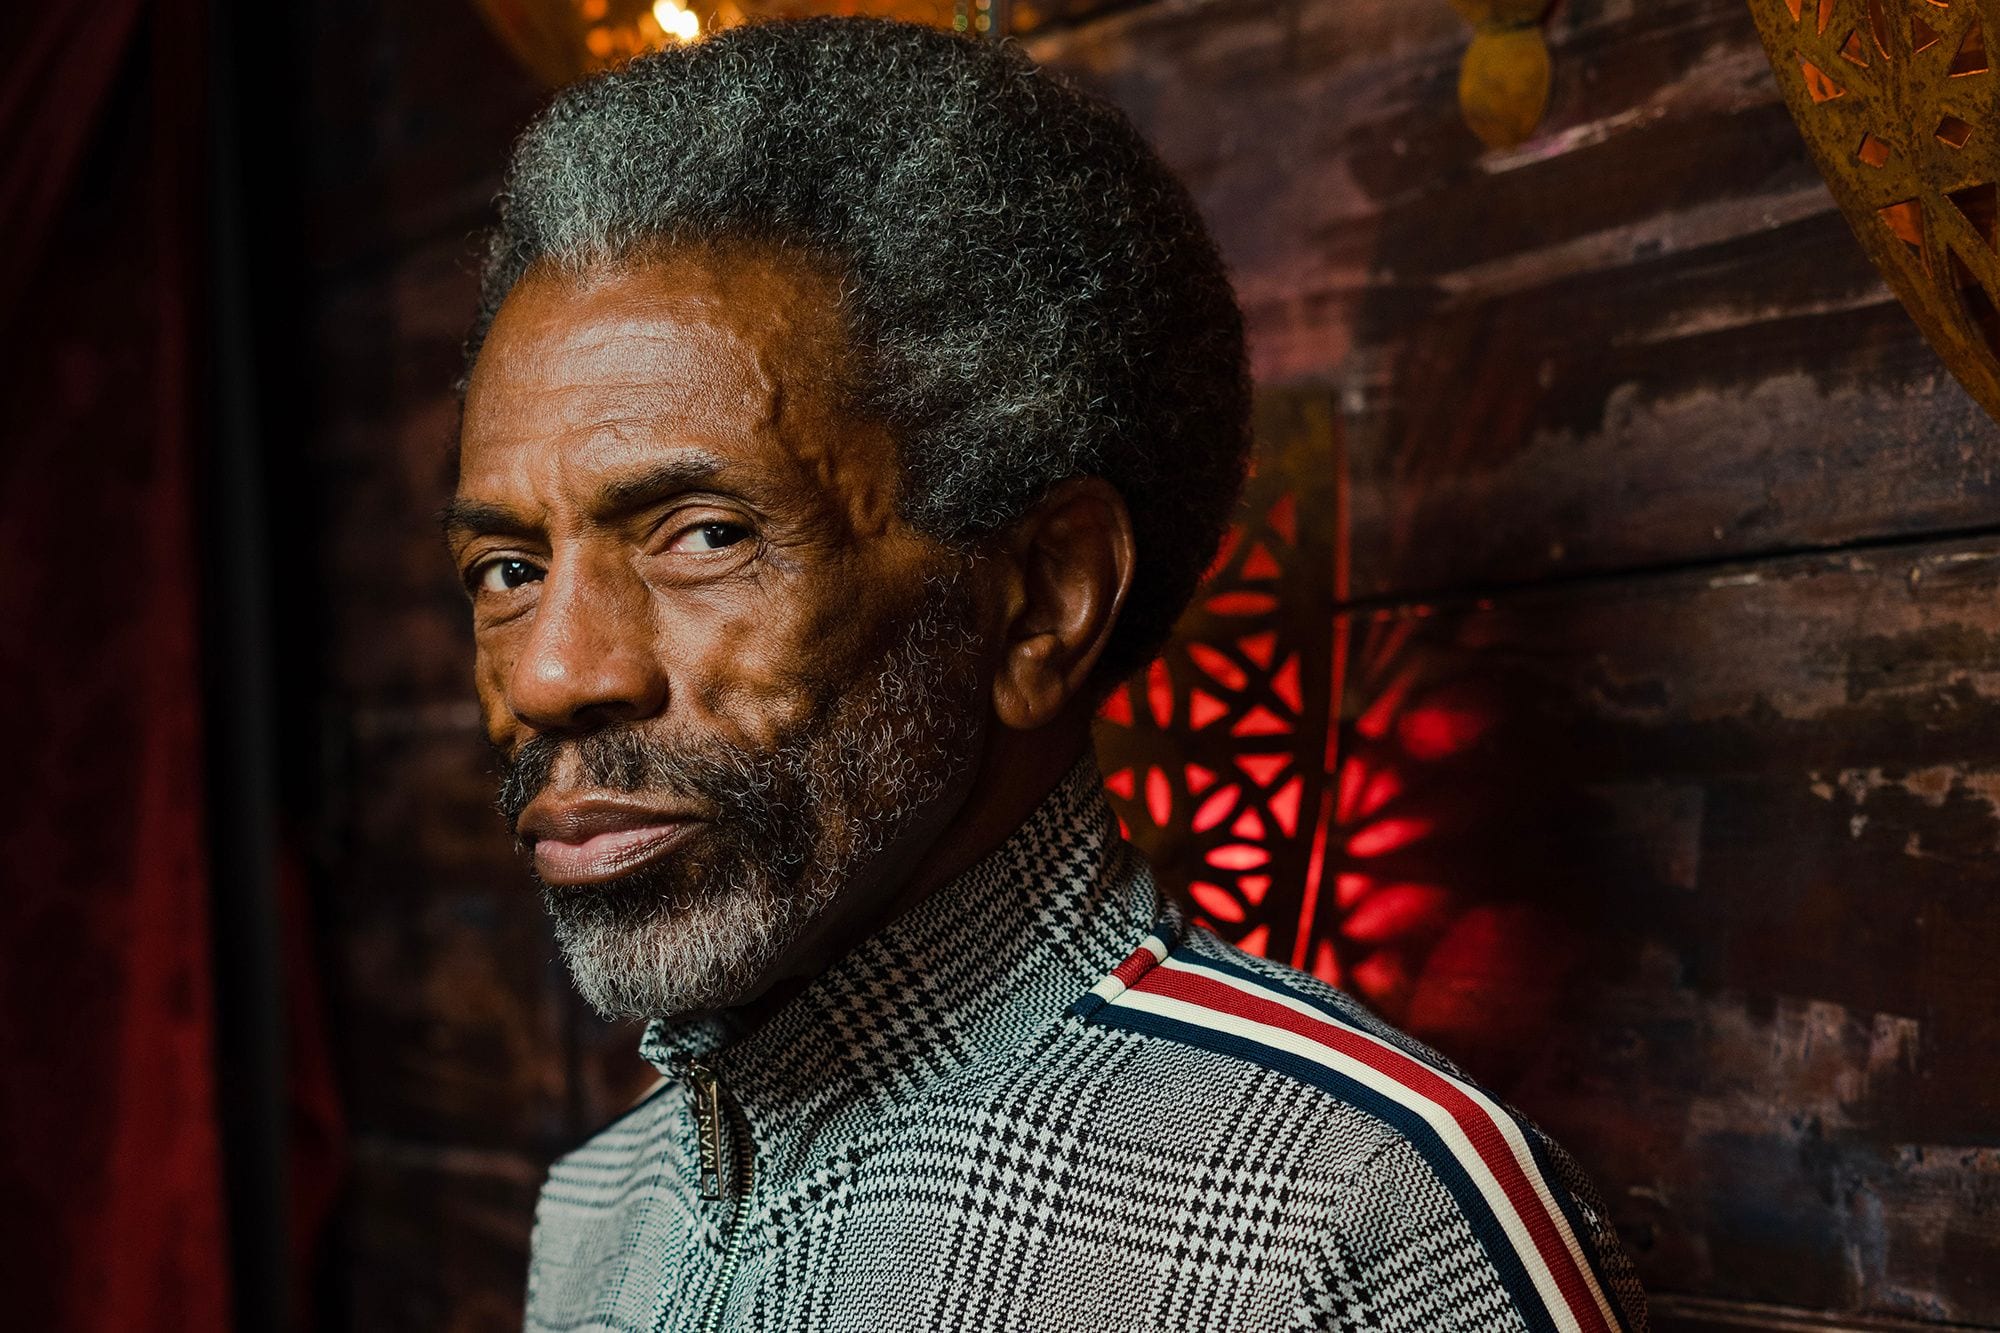 Flowers for Hermes: An Interview with Performing Activist André De Shields